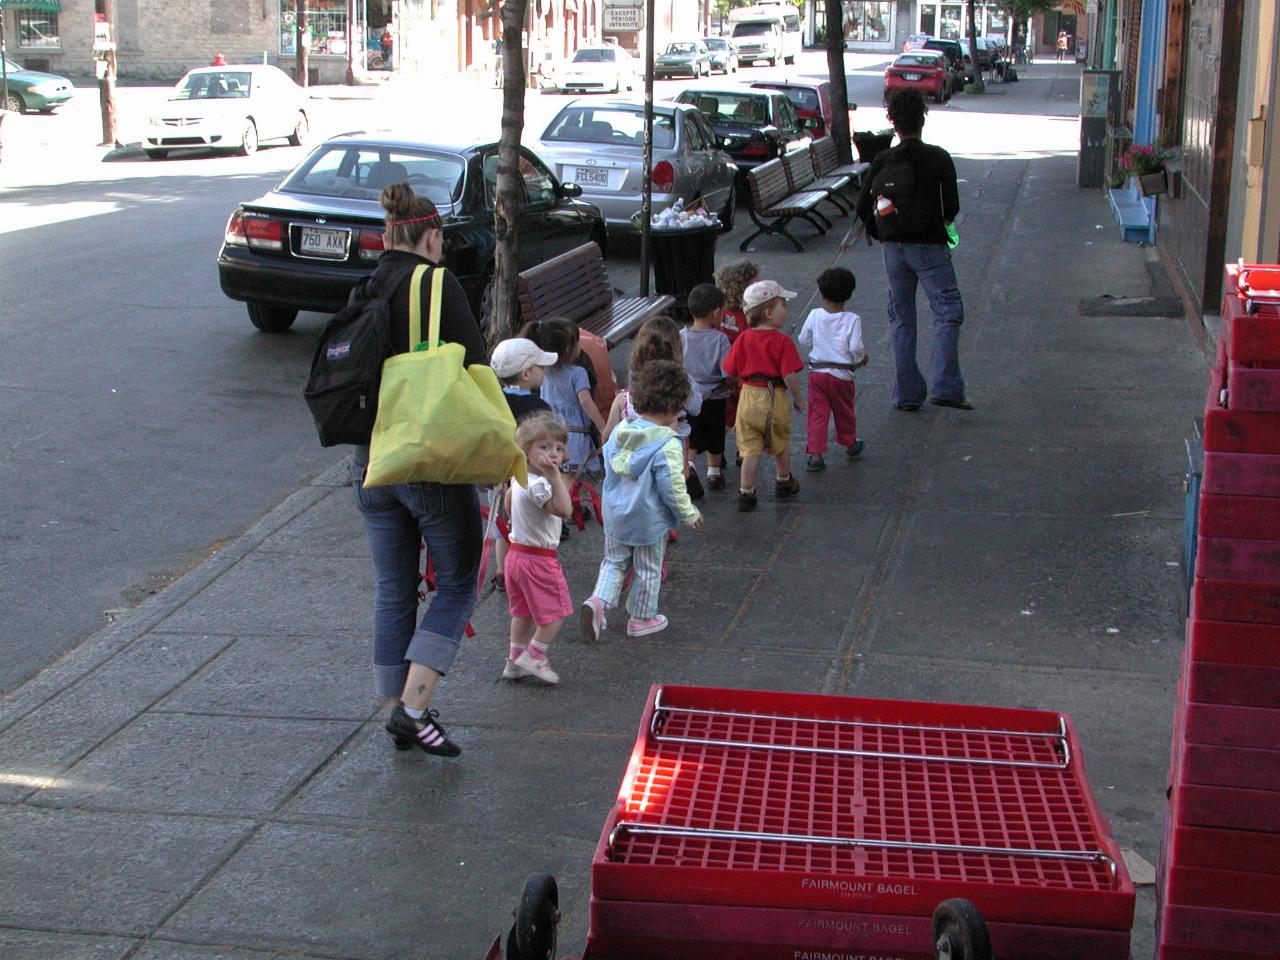 Quebec law requires pre-school kids be taken out for socialising - in a group, tied together!